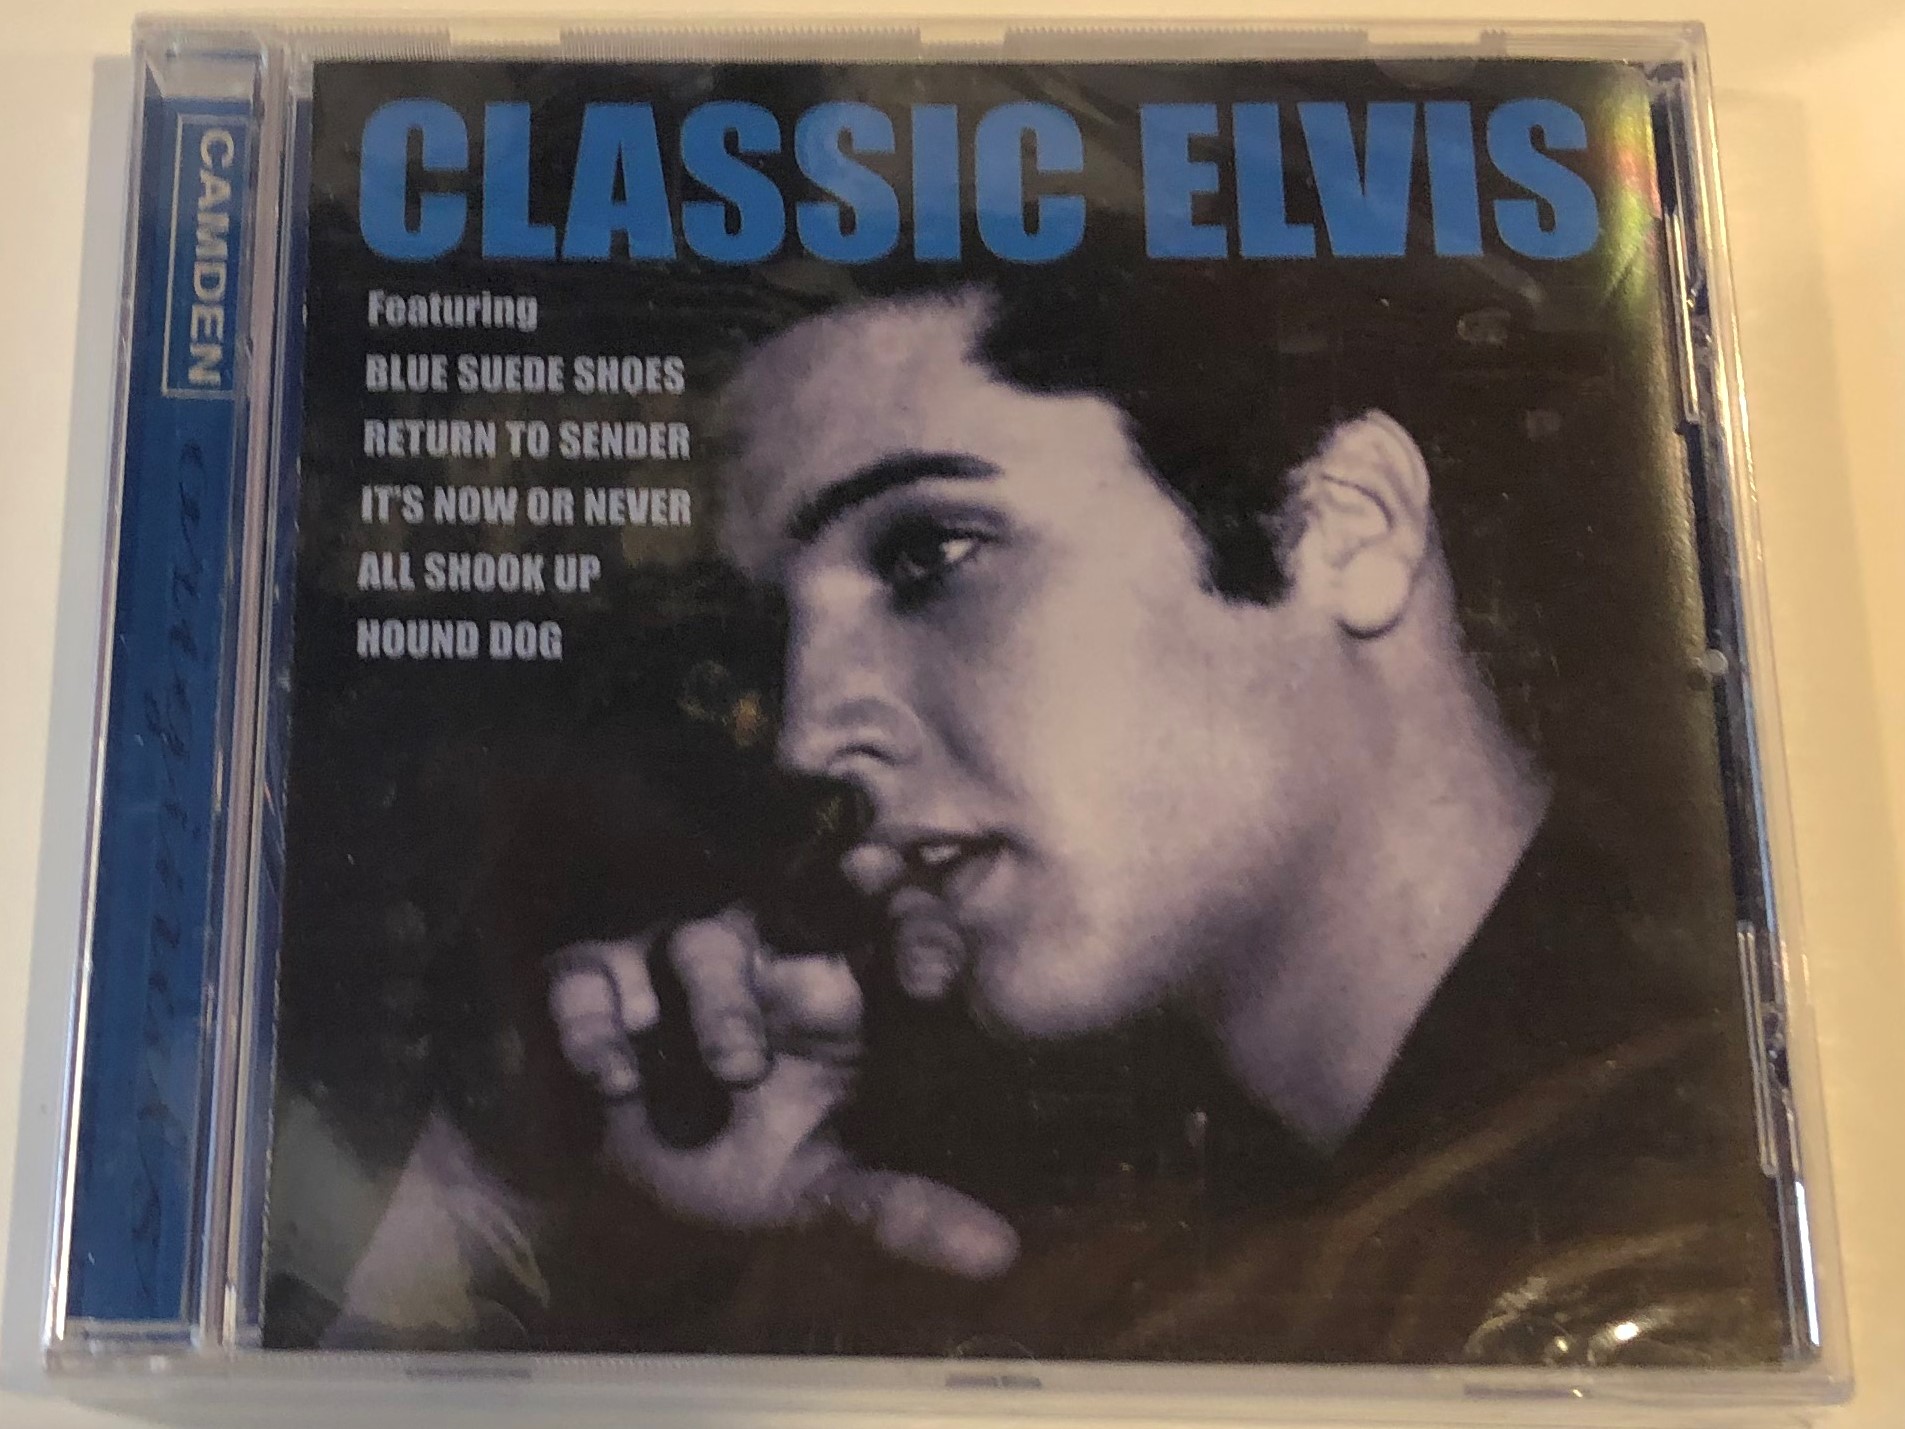 classic-elvis-featuring-blue-suede-shoes-return-to-sender-it-s-now-or-never-all-shook-up-hound-dog-bmg-audio-cd-1997-74321-476822-1-.jpg